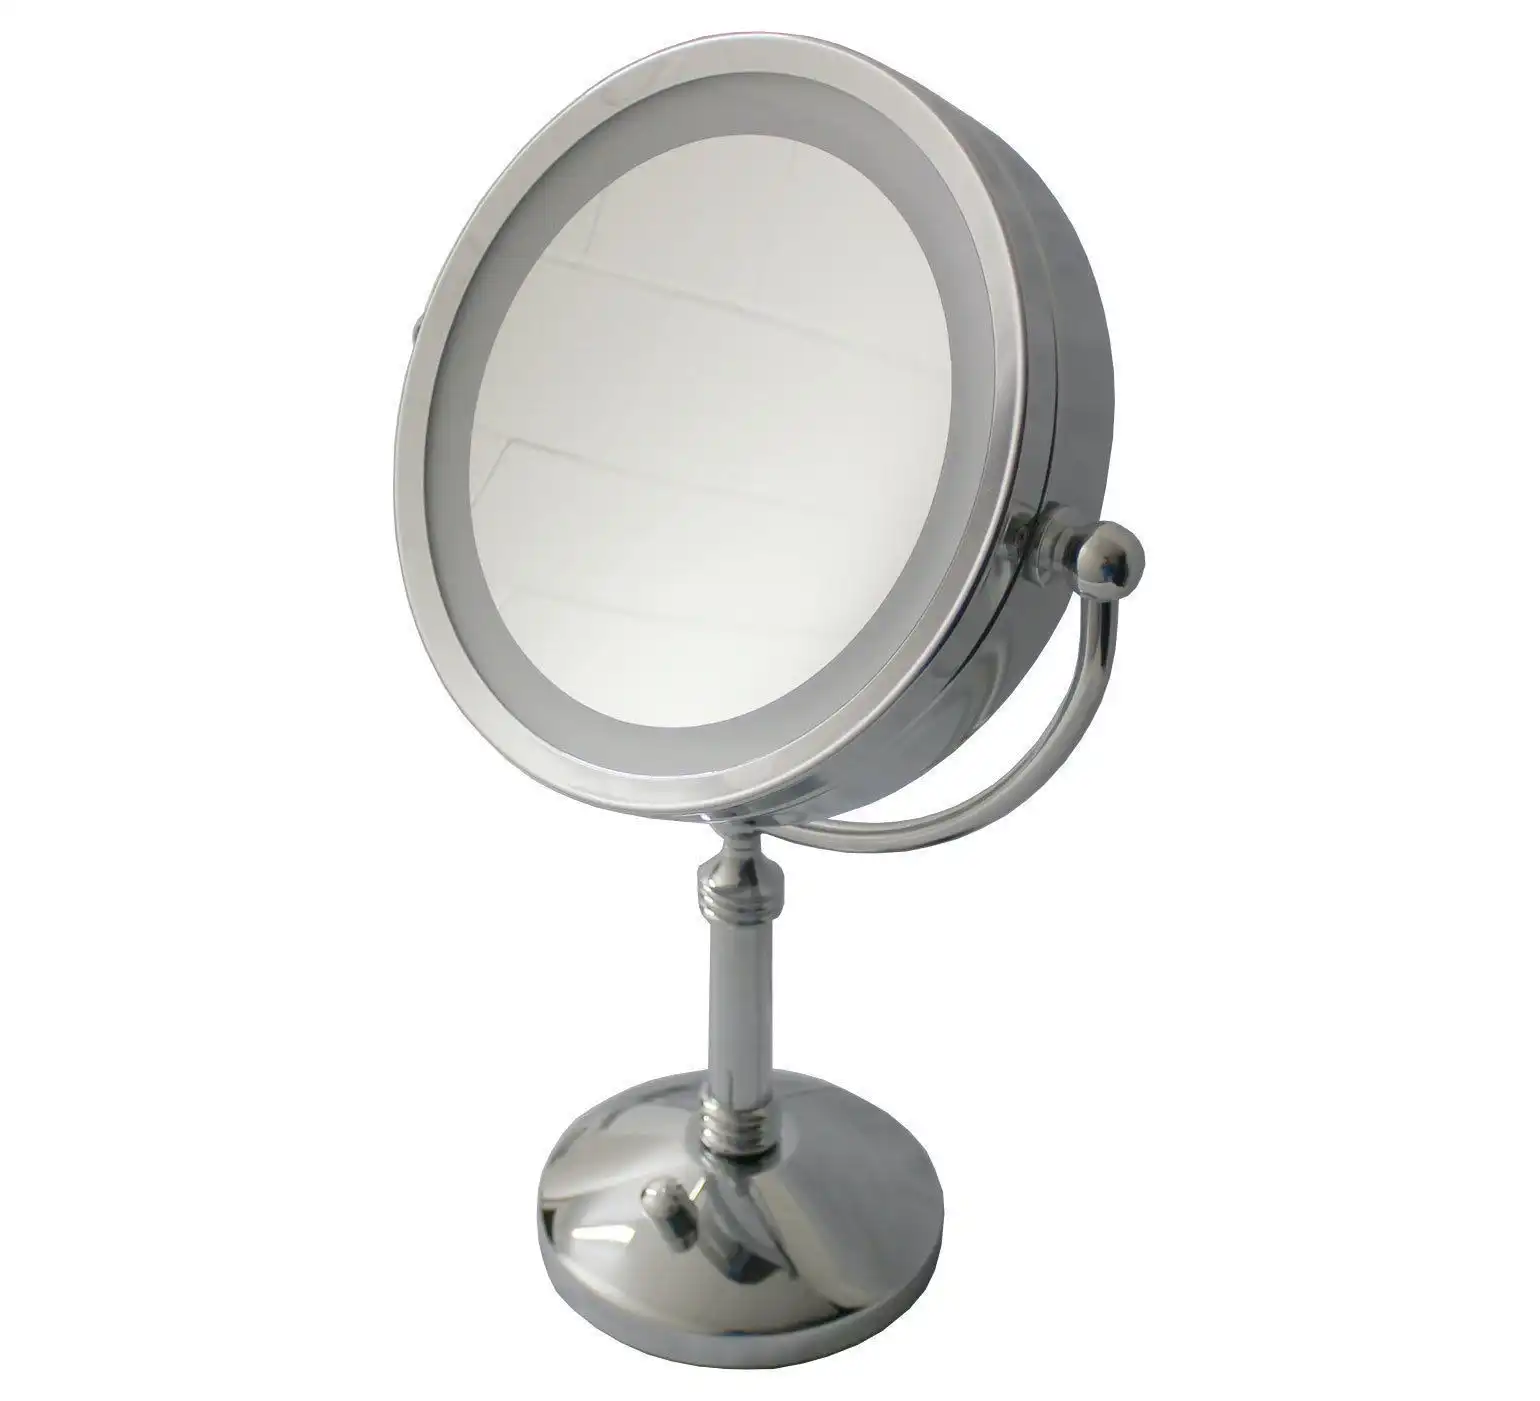 TODO 7" Led Backlit Cosmetic Make Up Mirror 1X / 5X Magnification Battery Powered